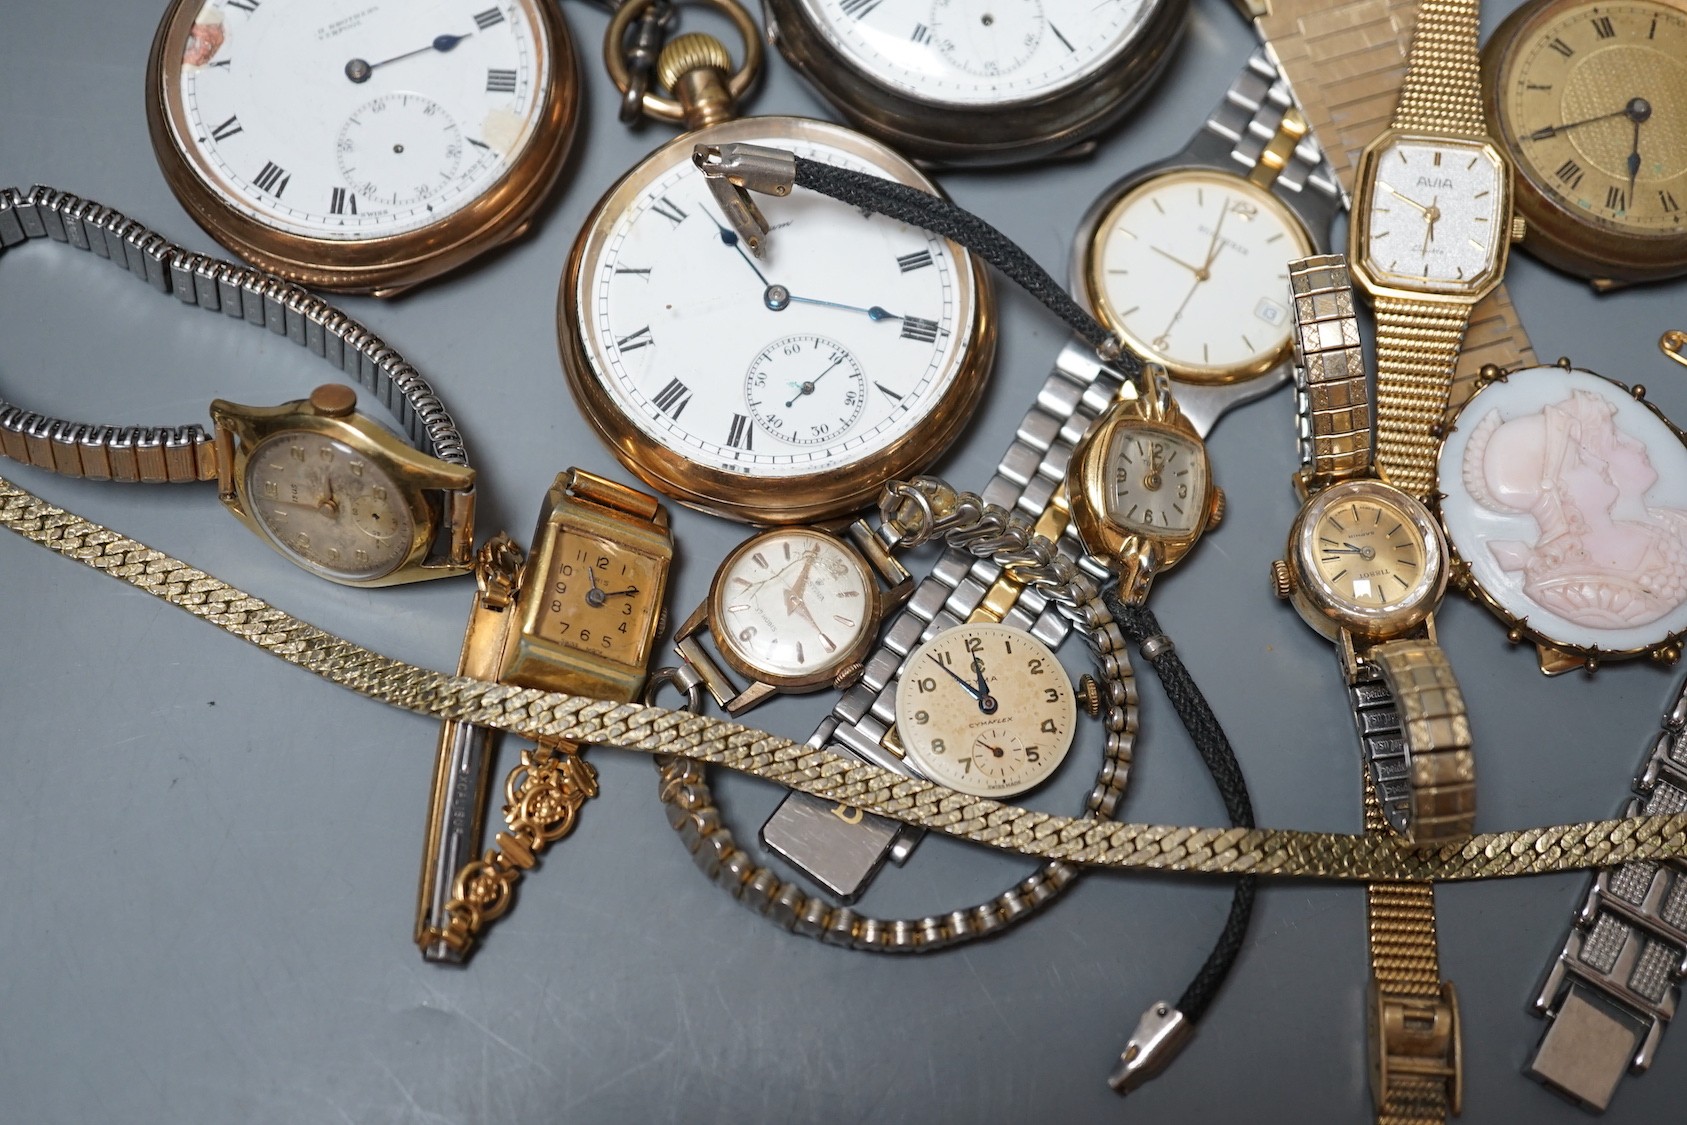 Four assorted pocket watches including tow silver and two gold plated, a brass cased fob watch and a group of sundry lady's and gentleman's mainly modern wrist watches, including Pulsar.